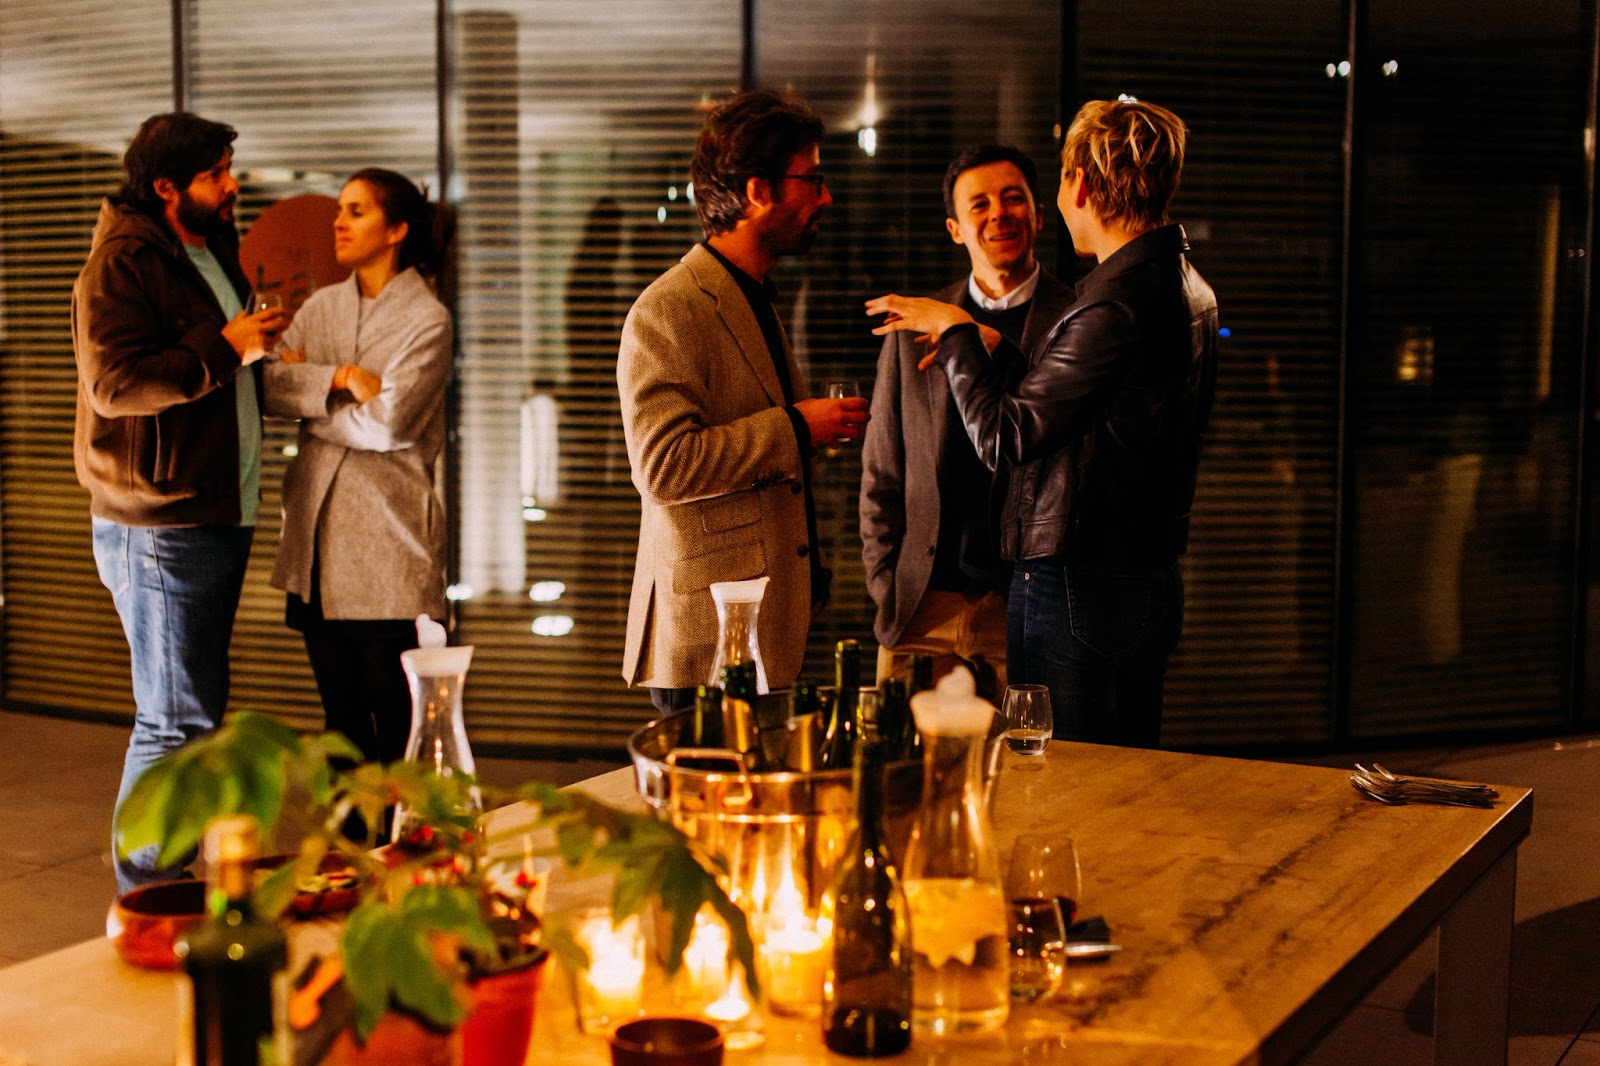 People stand and chat over drinks at an office holiday party